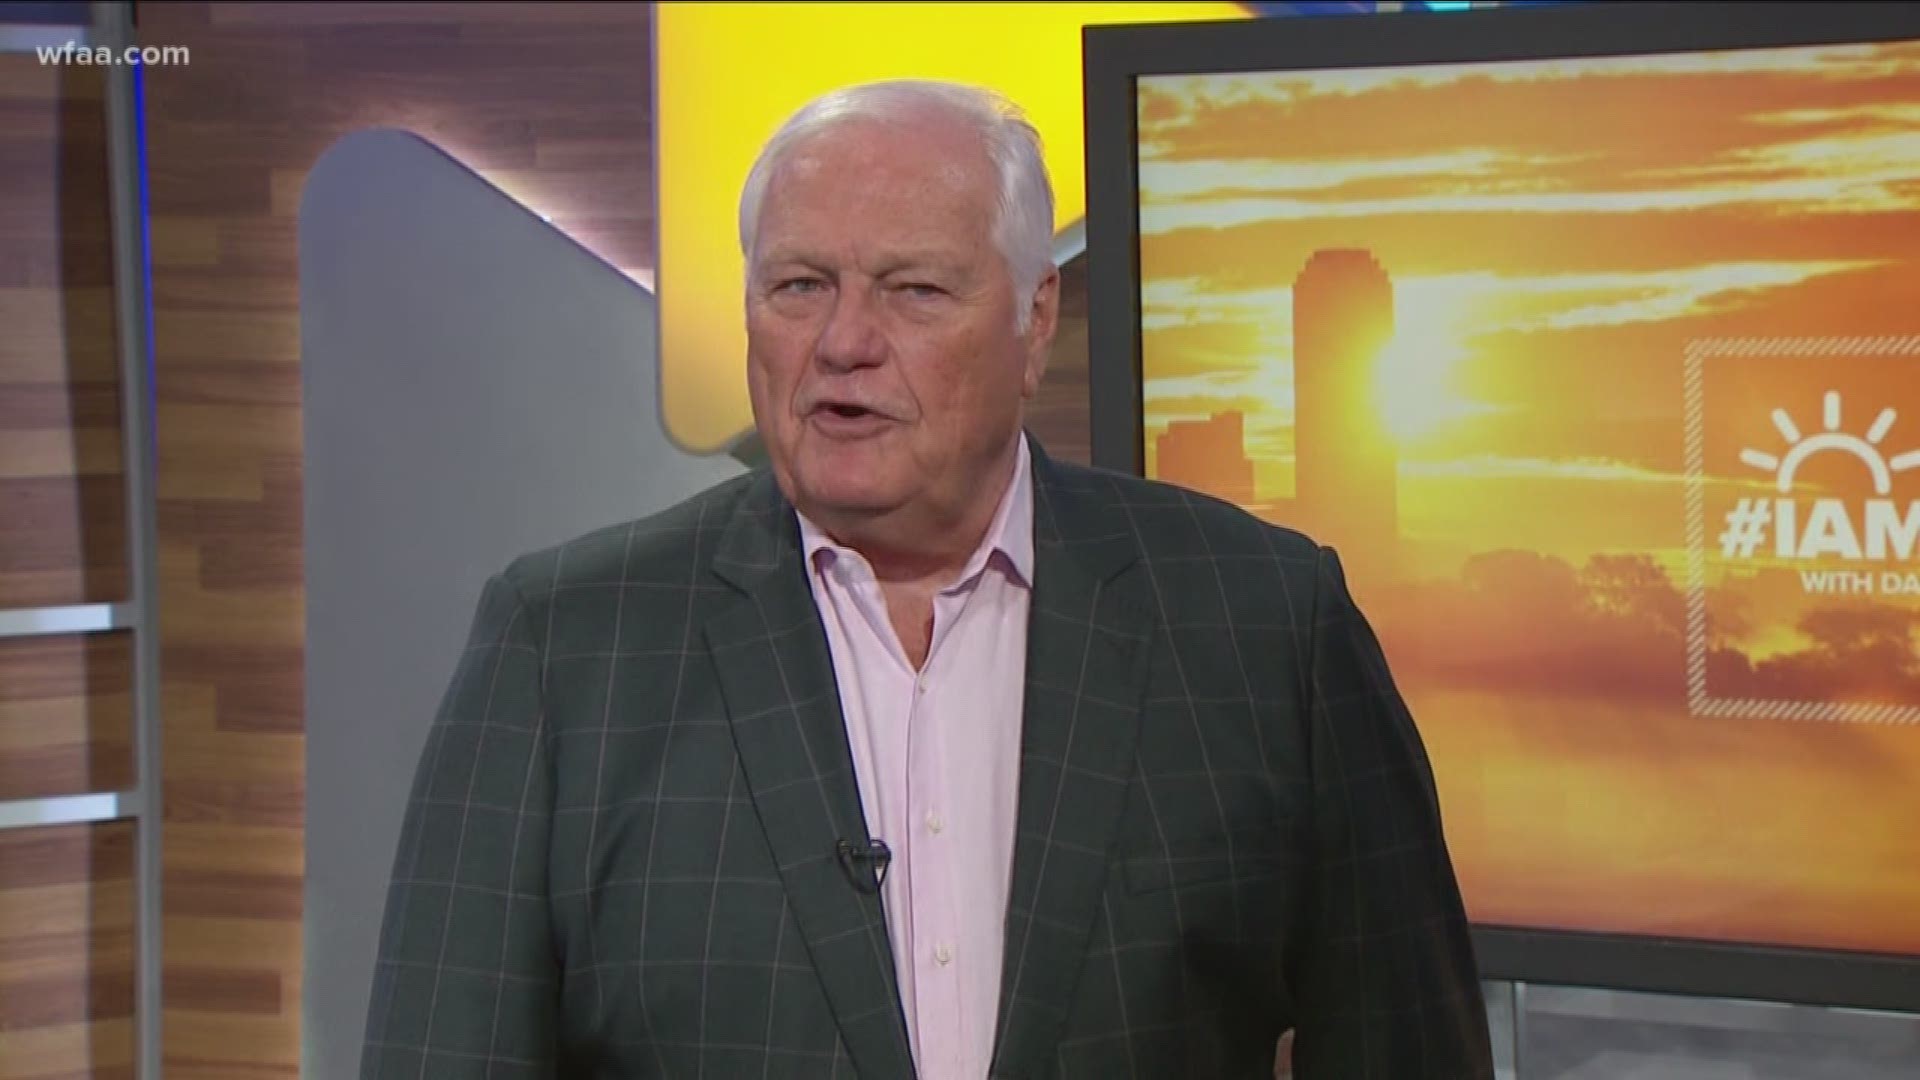 Dale Hansen Commentary: What do you blame for the violence?